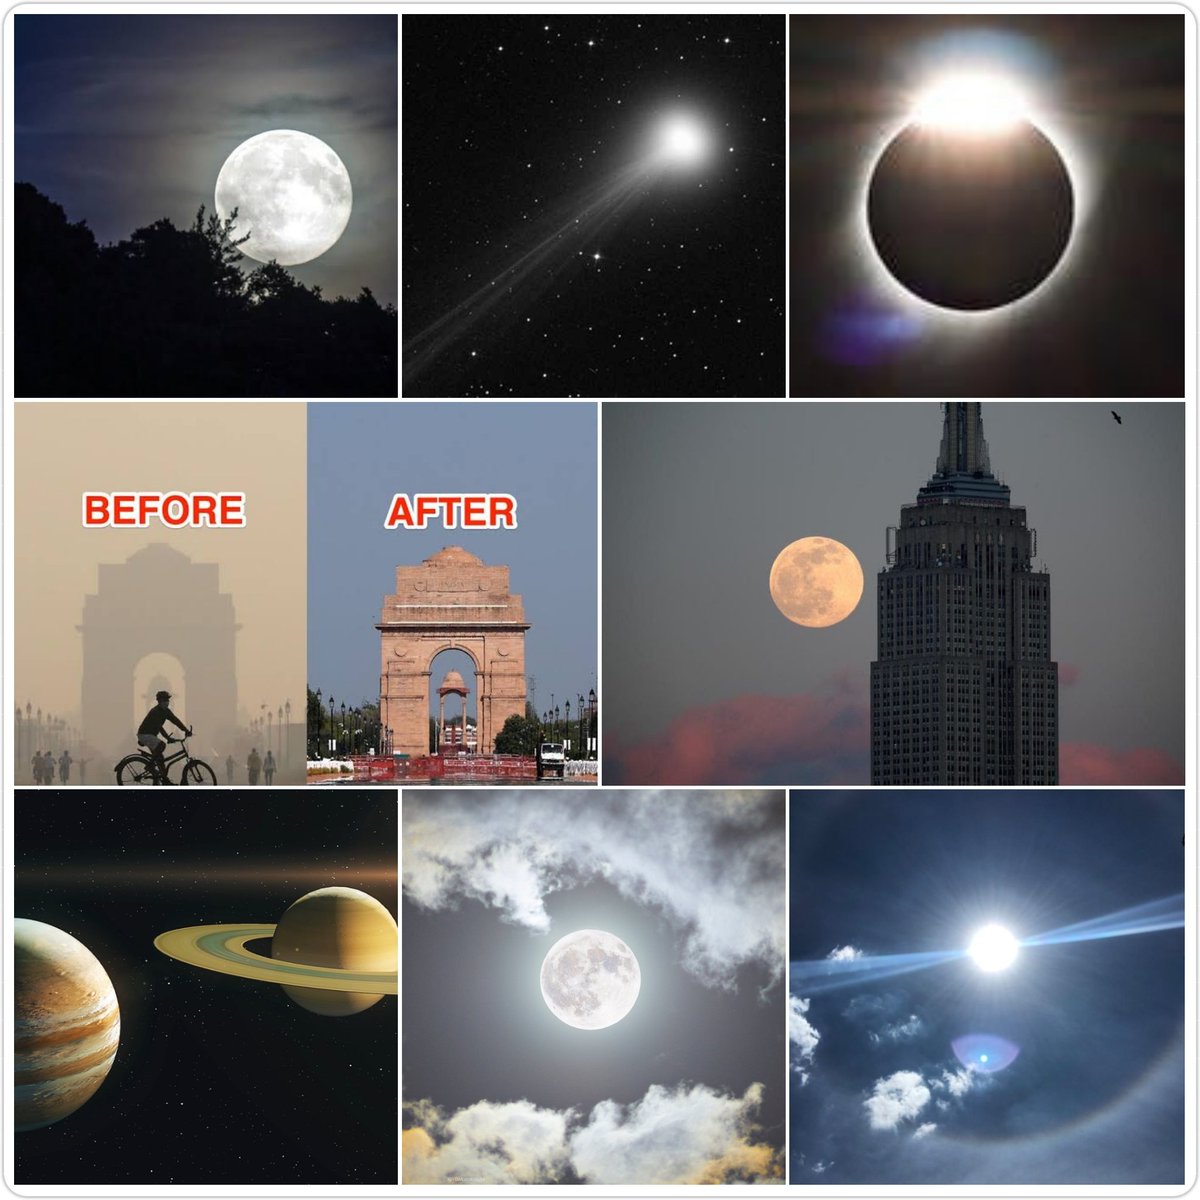 Seeing that a 2020 review will only bring hurtful memories, let's rather indulge in a short thread on phenomenal natural moments of 2020. Time person of the year should undoubtedly be Nature  [A Thread]  #sundayvibes  #SundayFeels  #SundayMorning  #SaturnJupiterConjunction